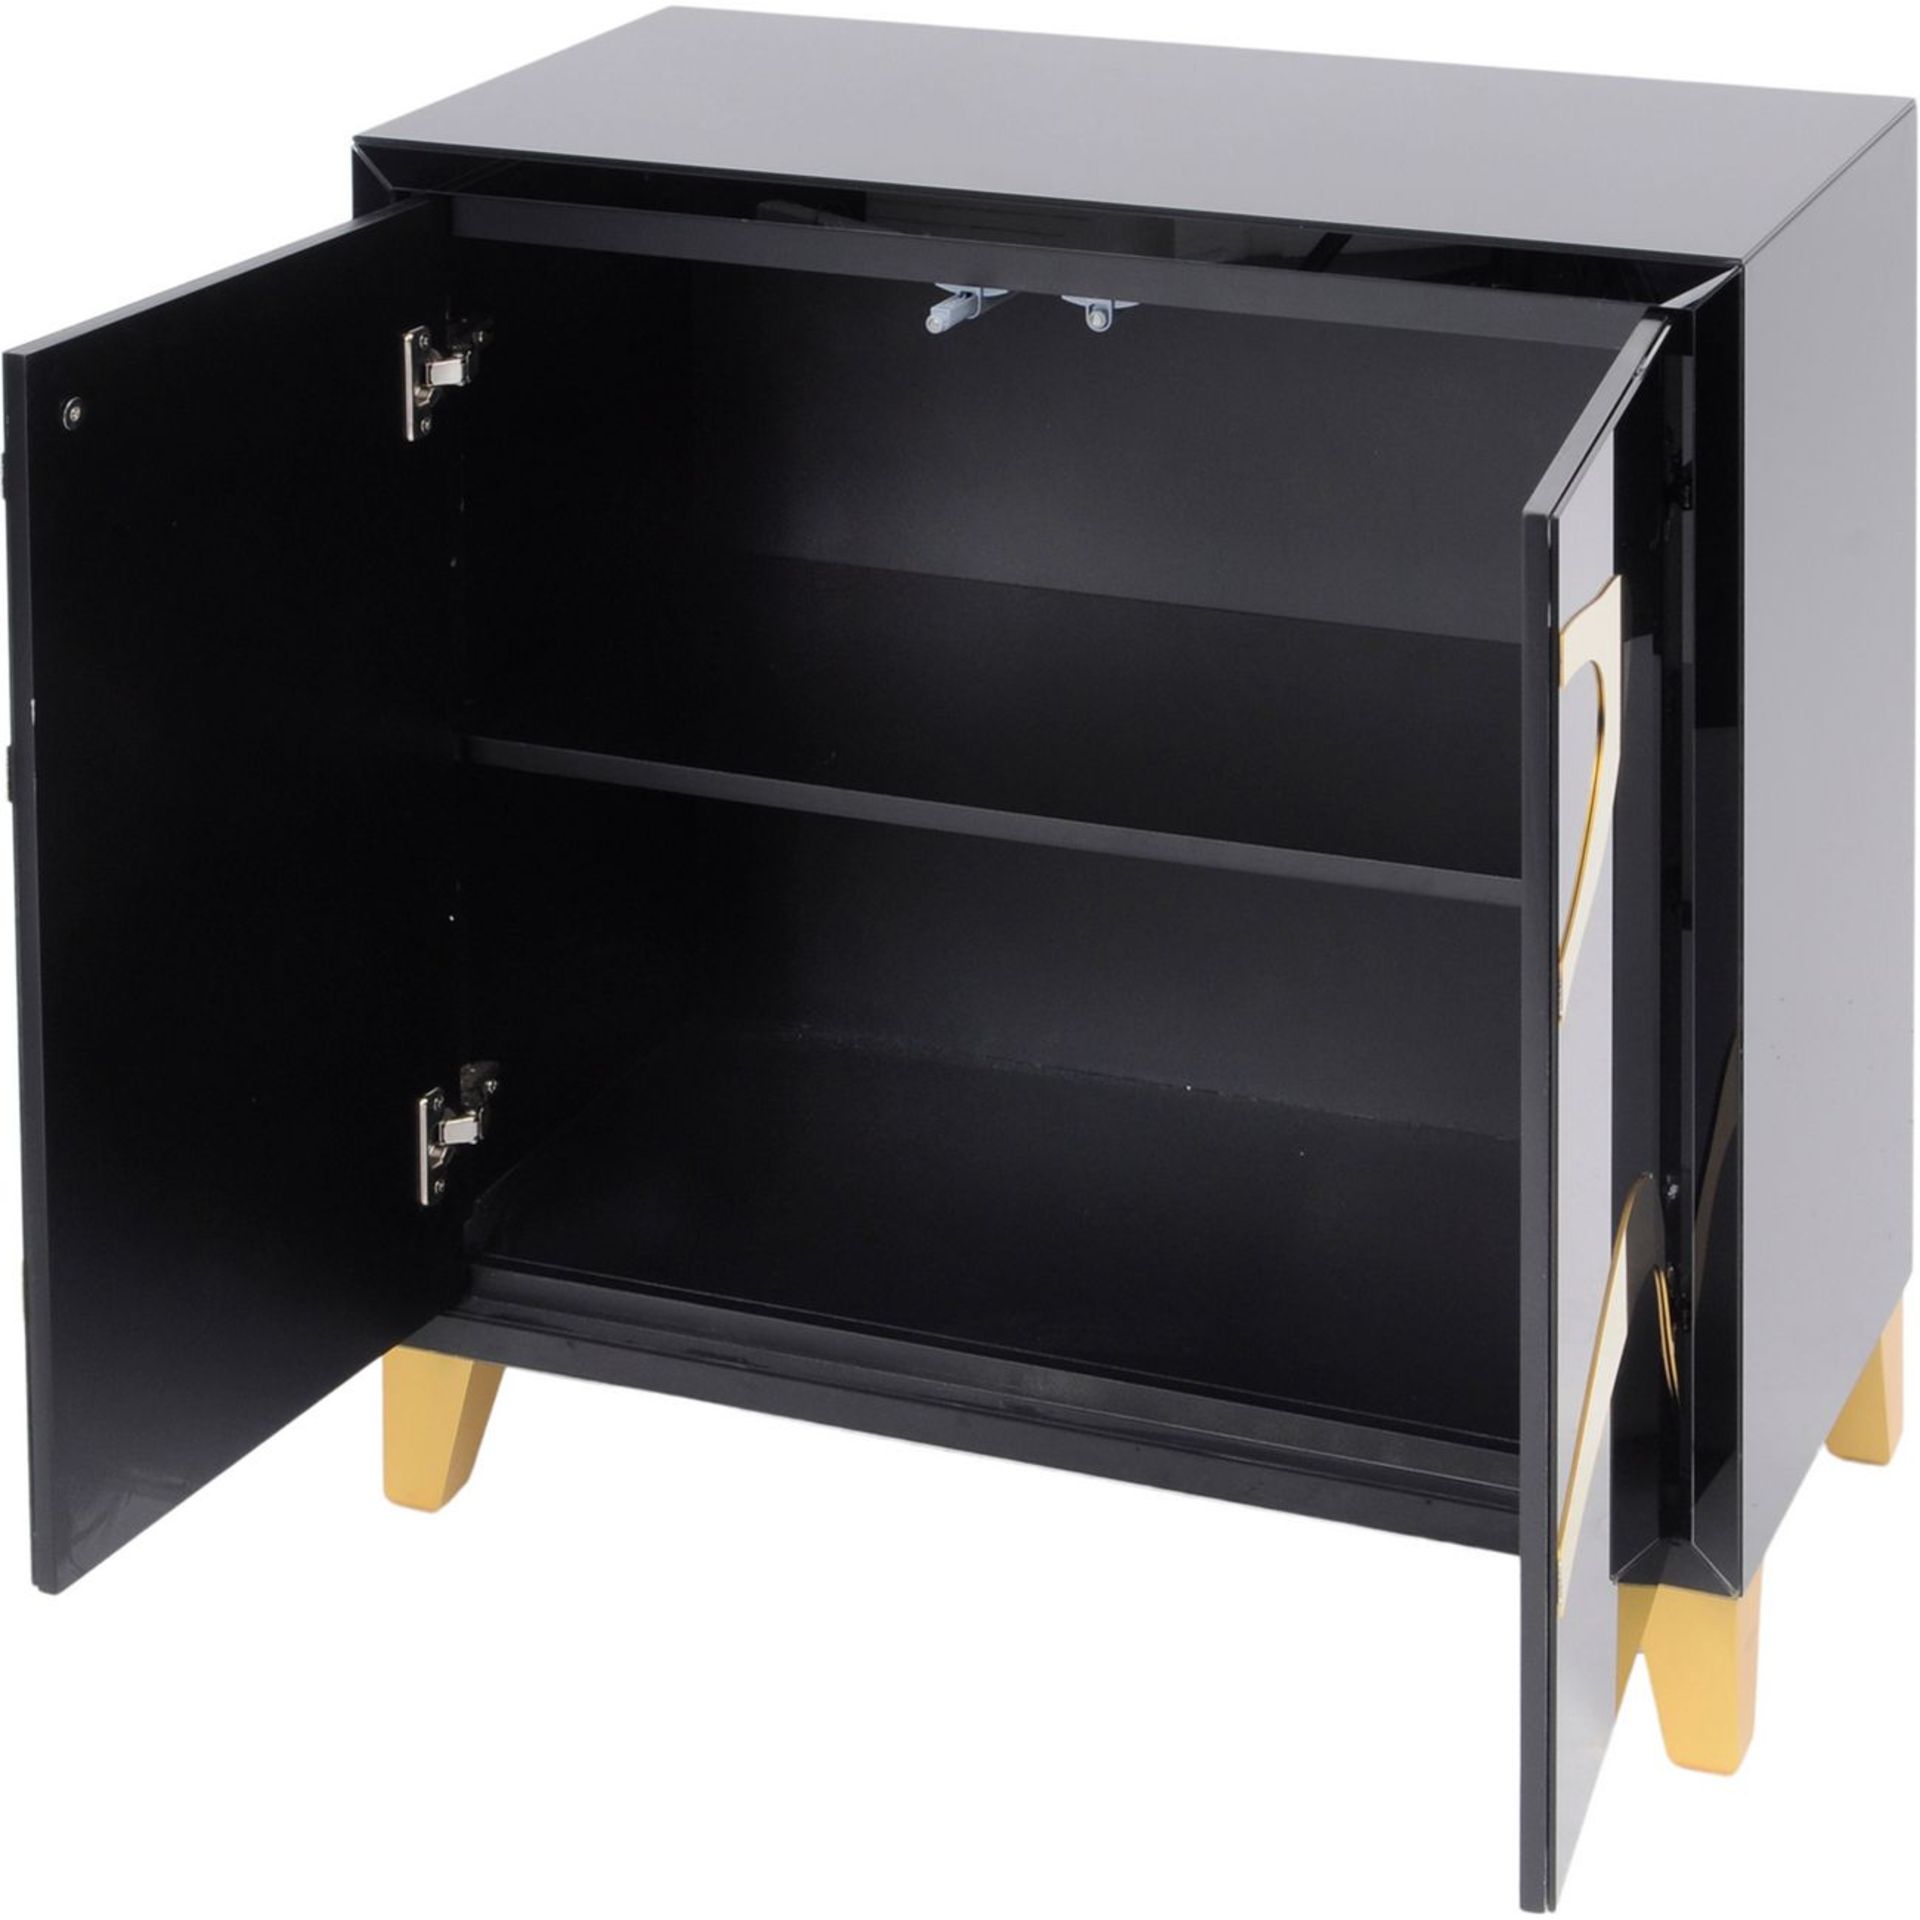 Taroko Black Mirrored Cabinet with Gold Motif - Image 2 of 2